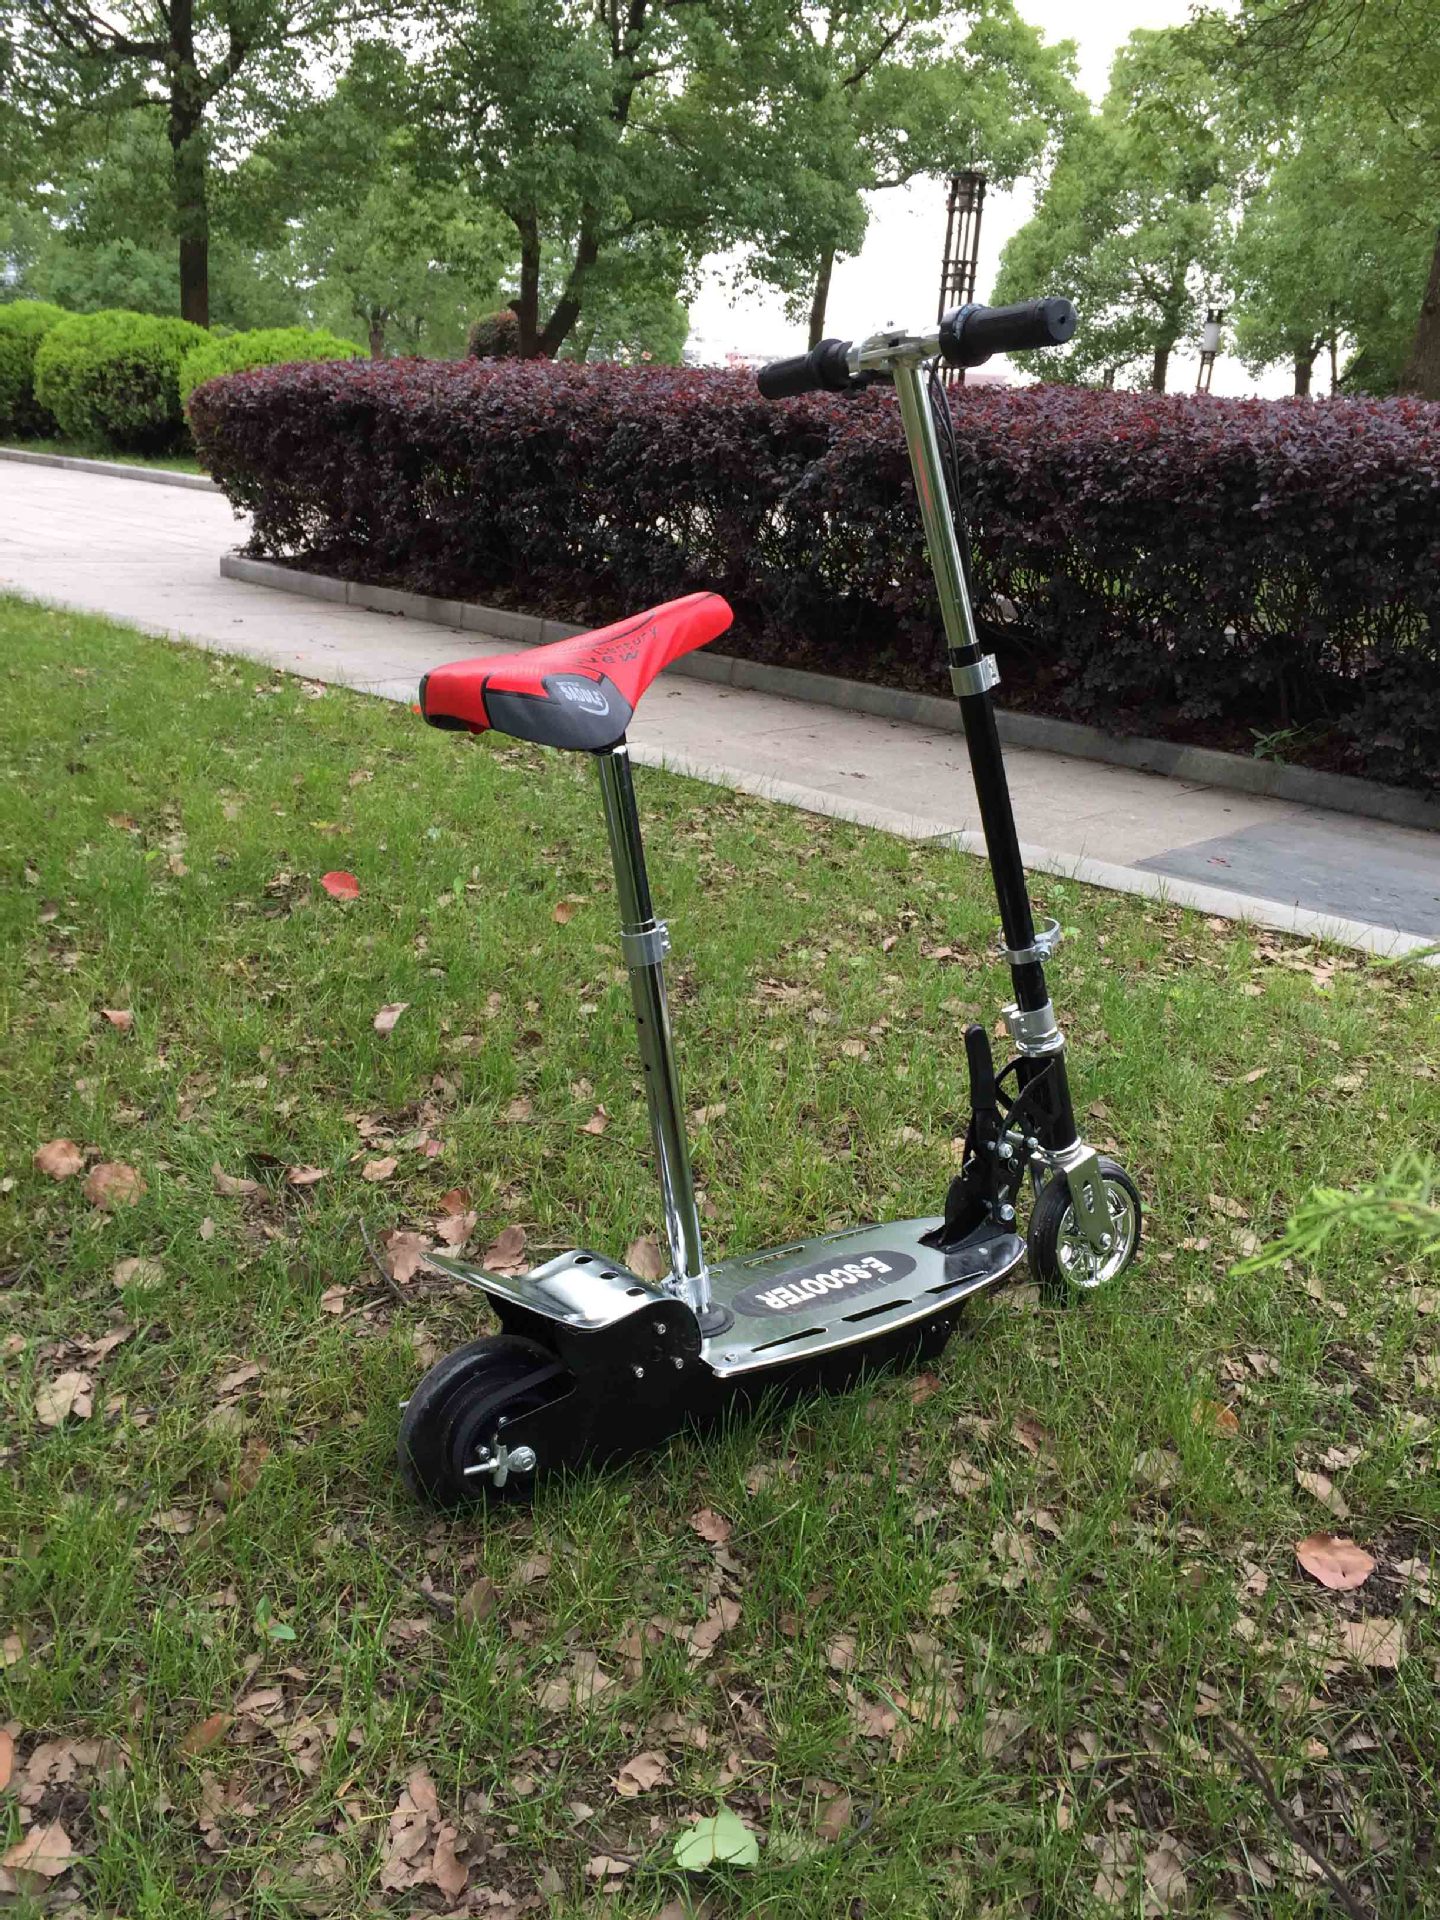 Foldable And Lightweight Electric Scooter